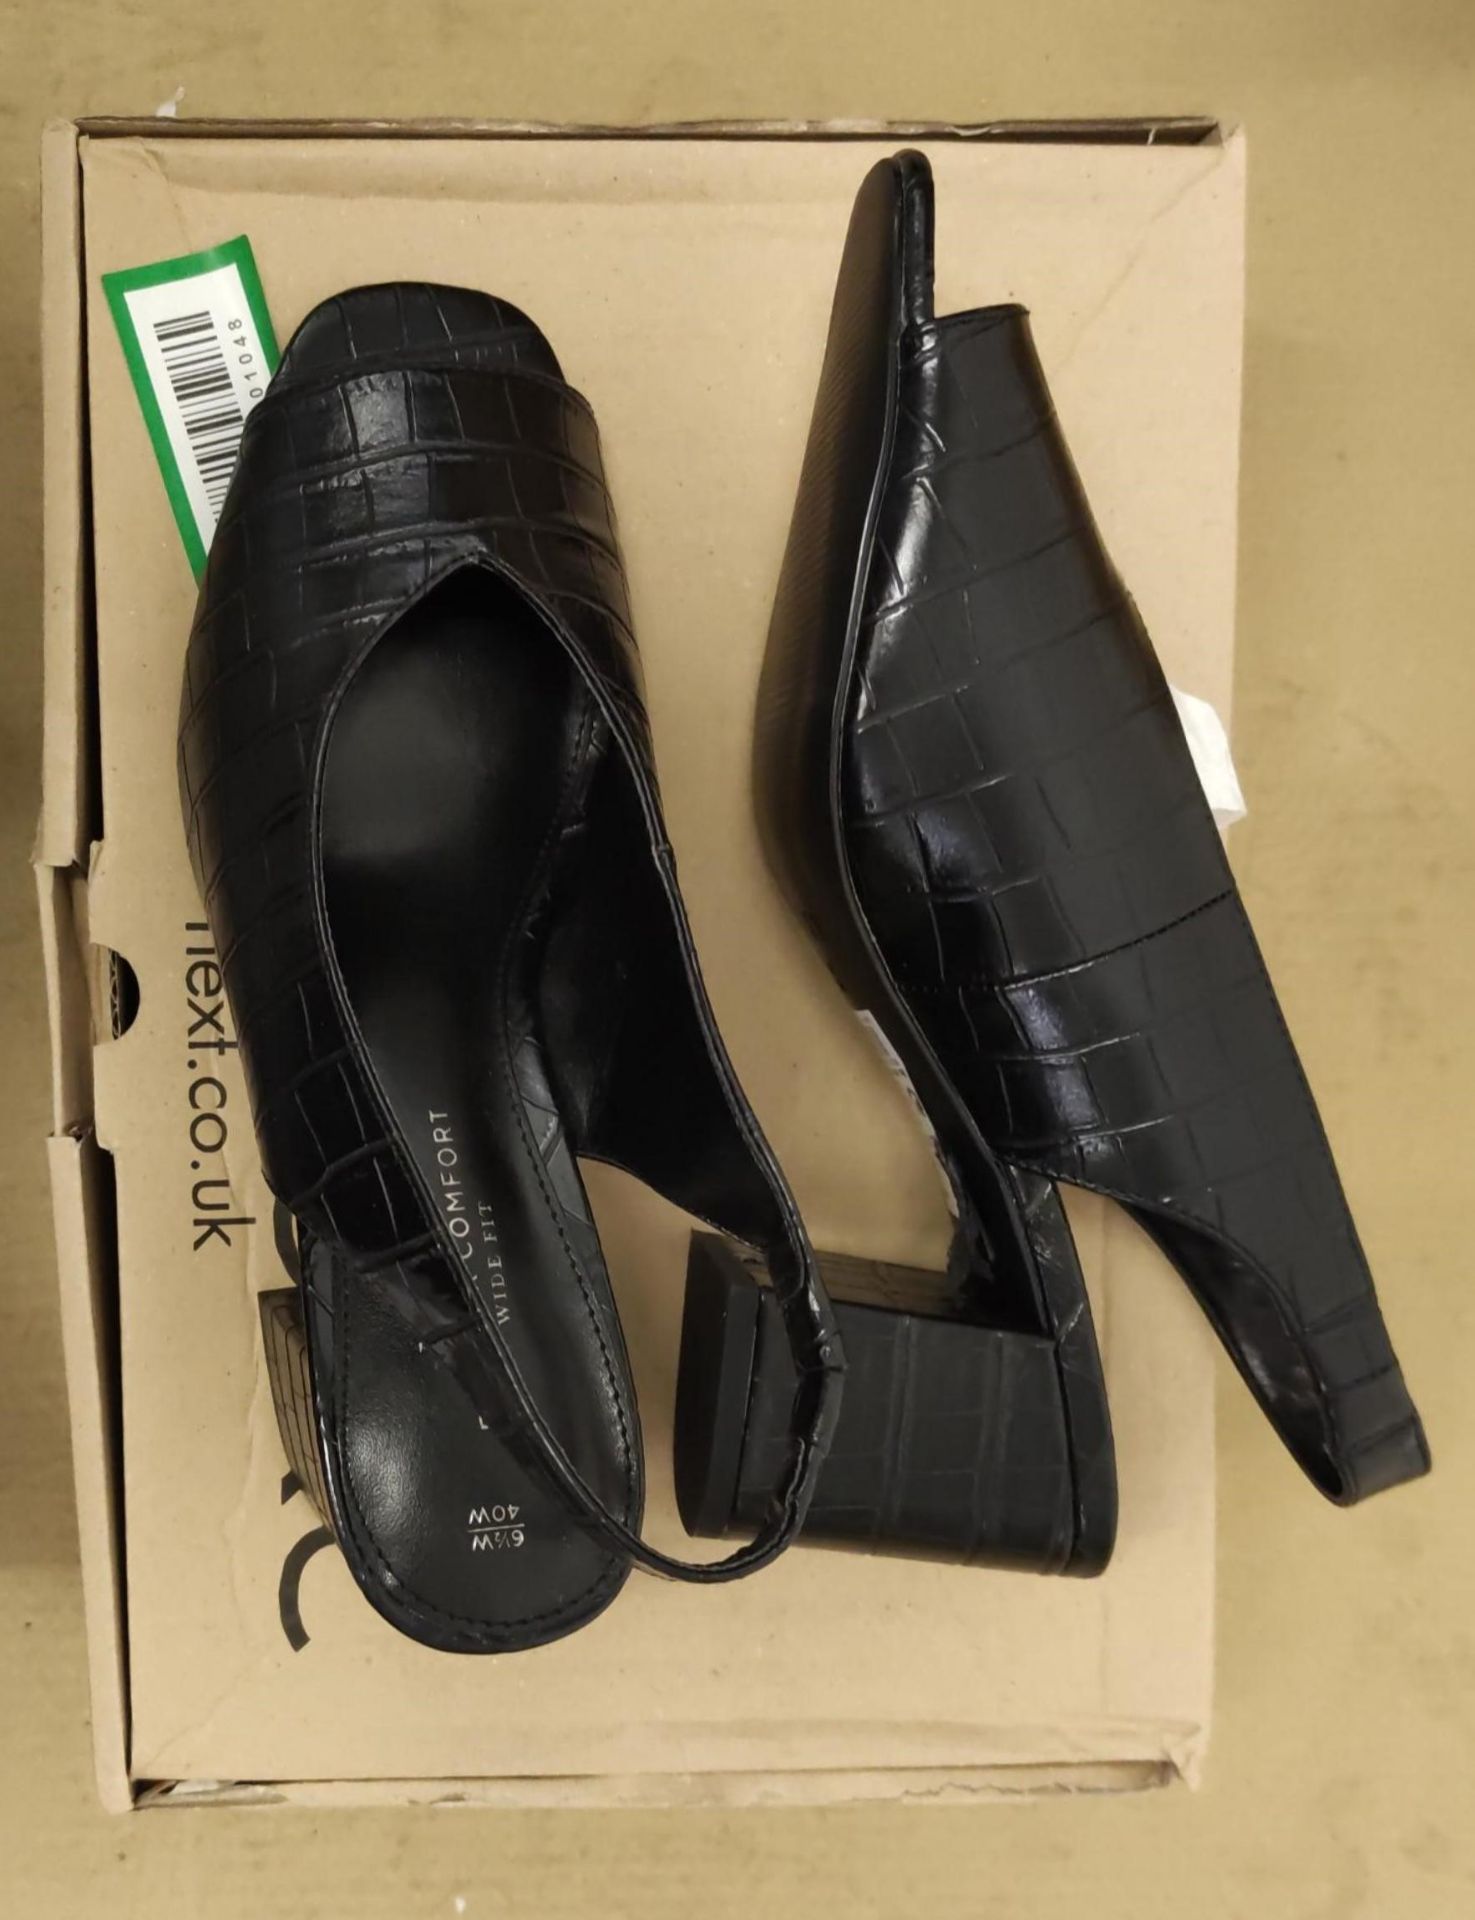 1 X BOXED BLACK CROCODILE PRINT OPEN TOE SLING BACK HEELS SIZE 6.5W £32Condition ReportALL ITEMS ARE